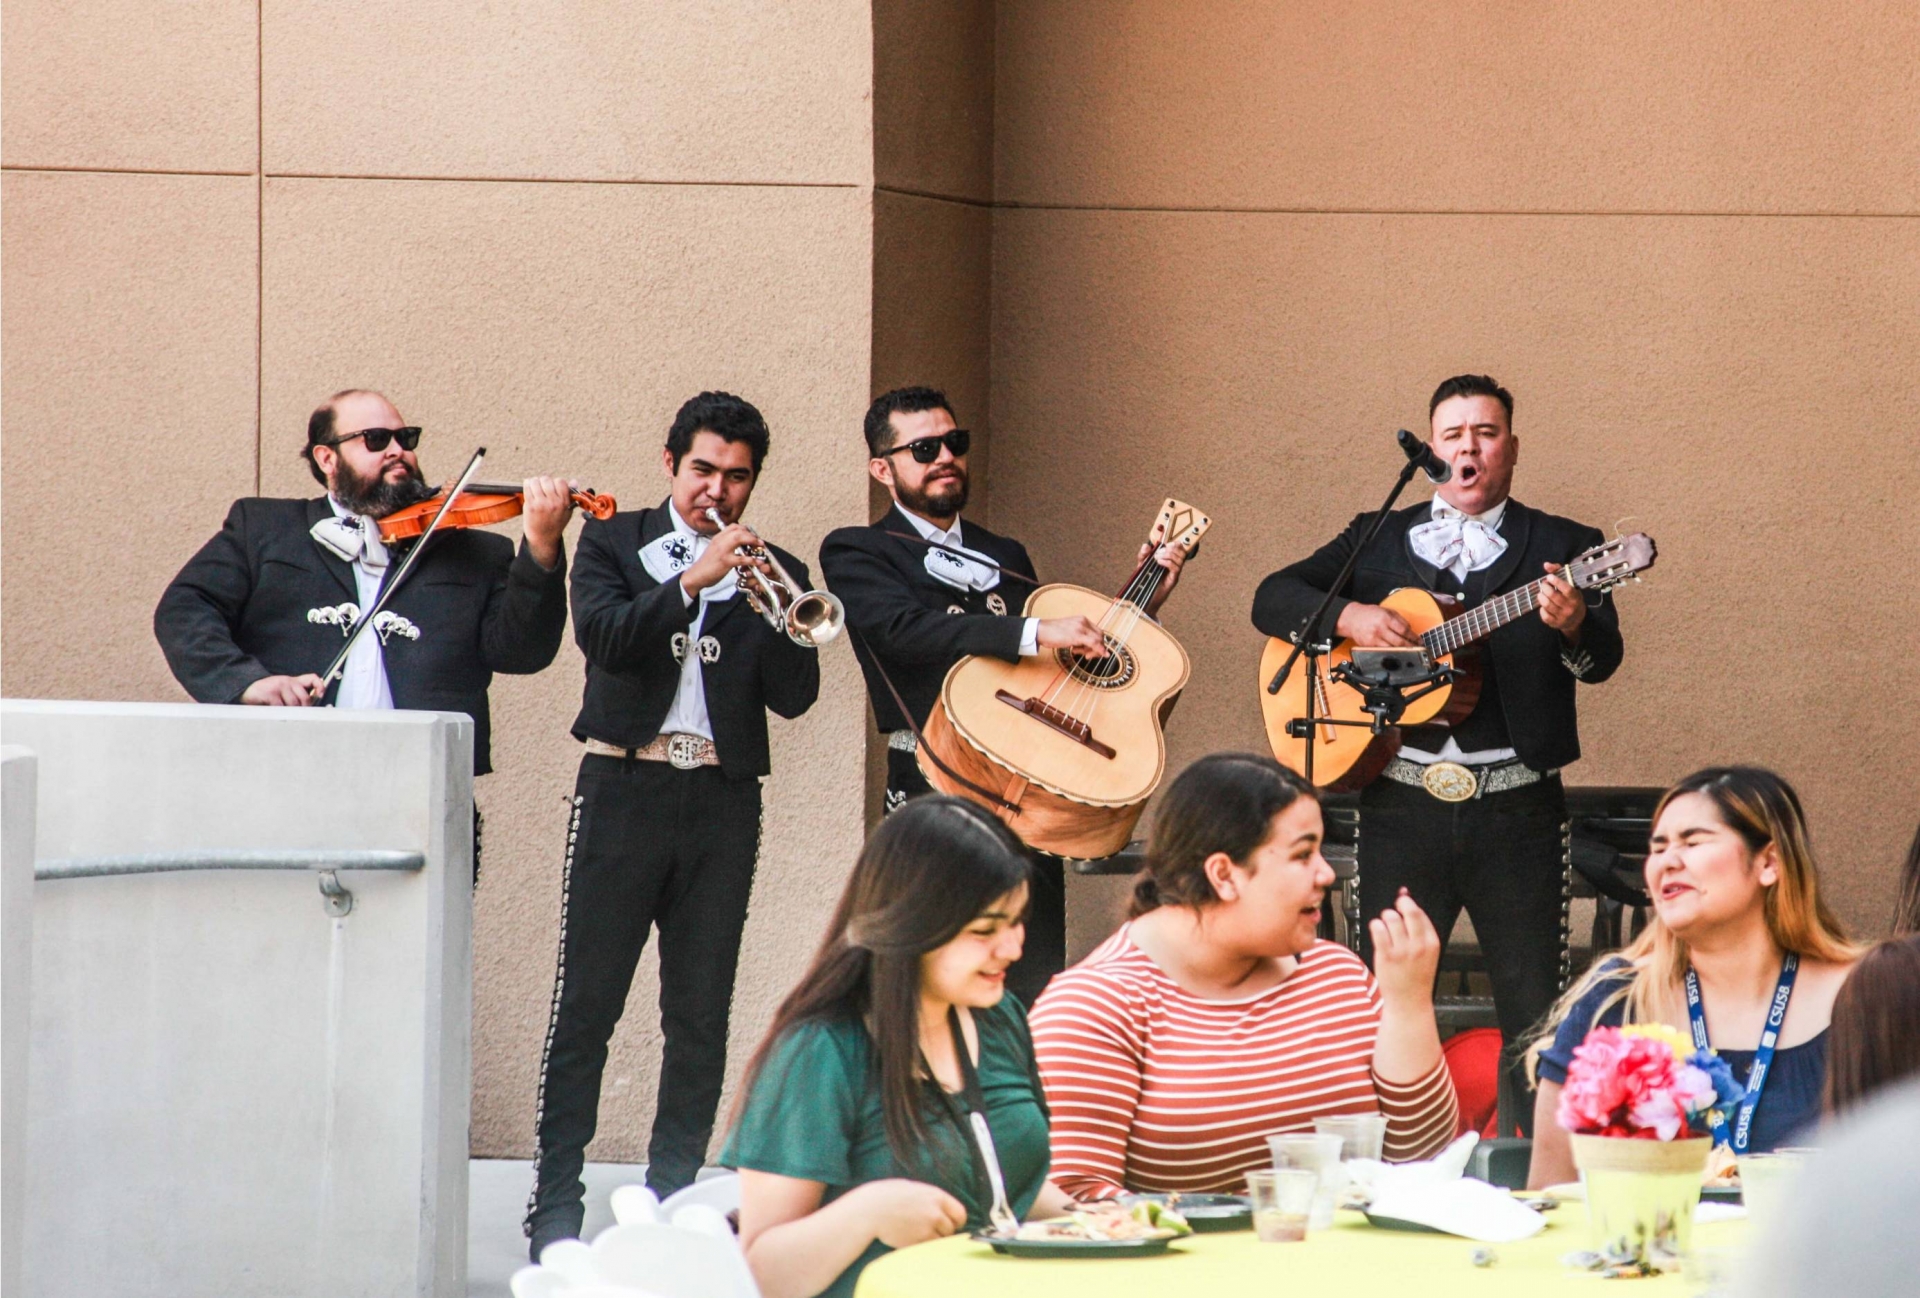 Mariachi playing behind tables of people eating